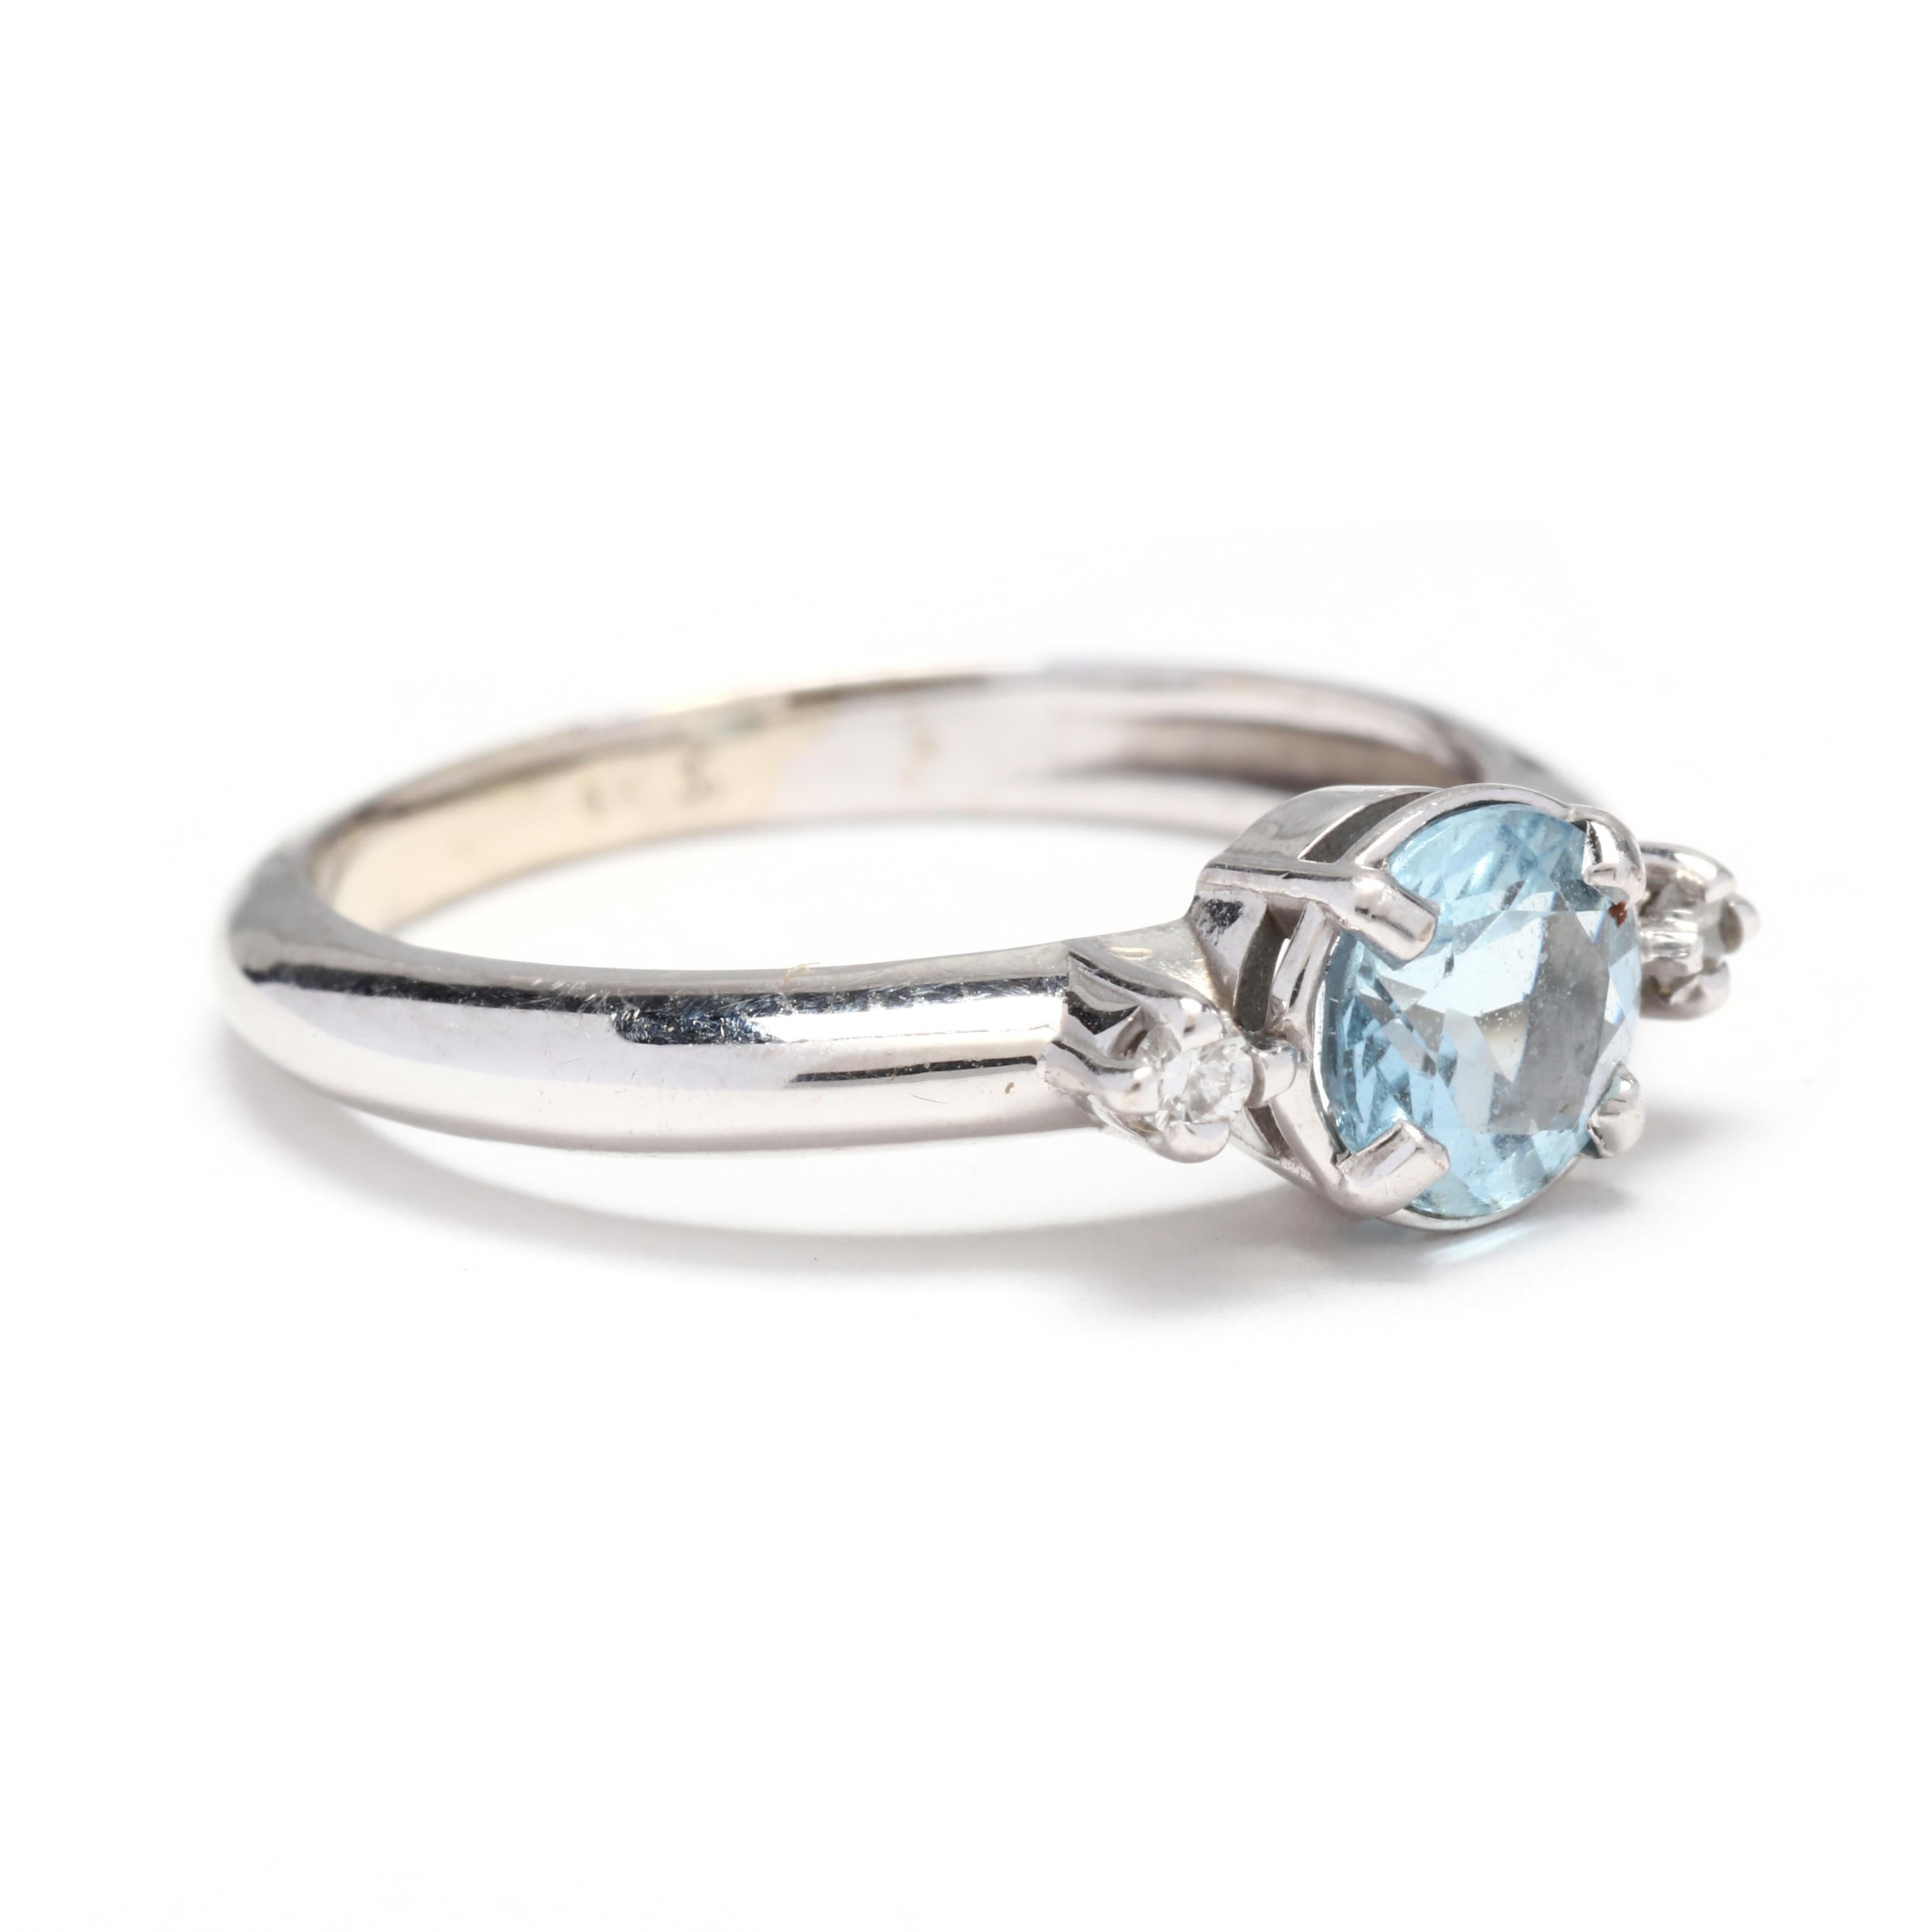 A 10 karat white gold blue topaz and diamond ring. This ring features a prong set, round cut blue topaz center stone weighing approximately .60 carat with a full cut round diamond on either side weighing approximately .02 total carats and a thin,